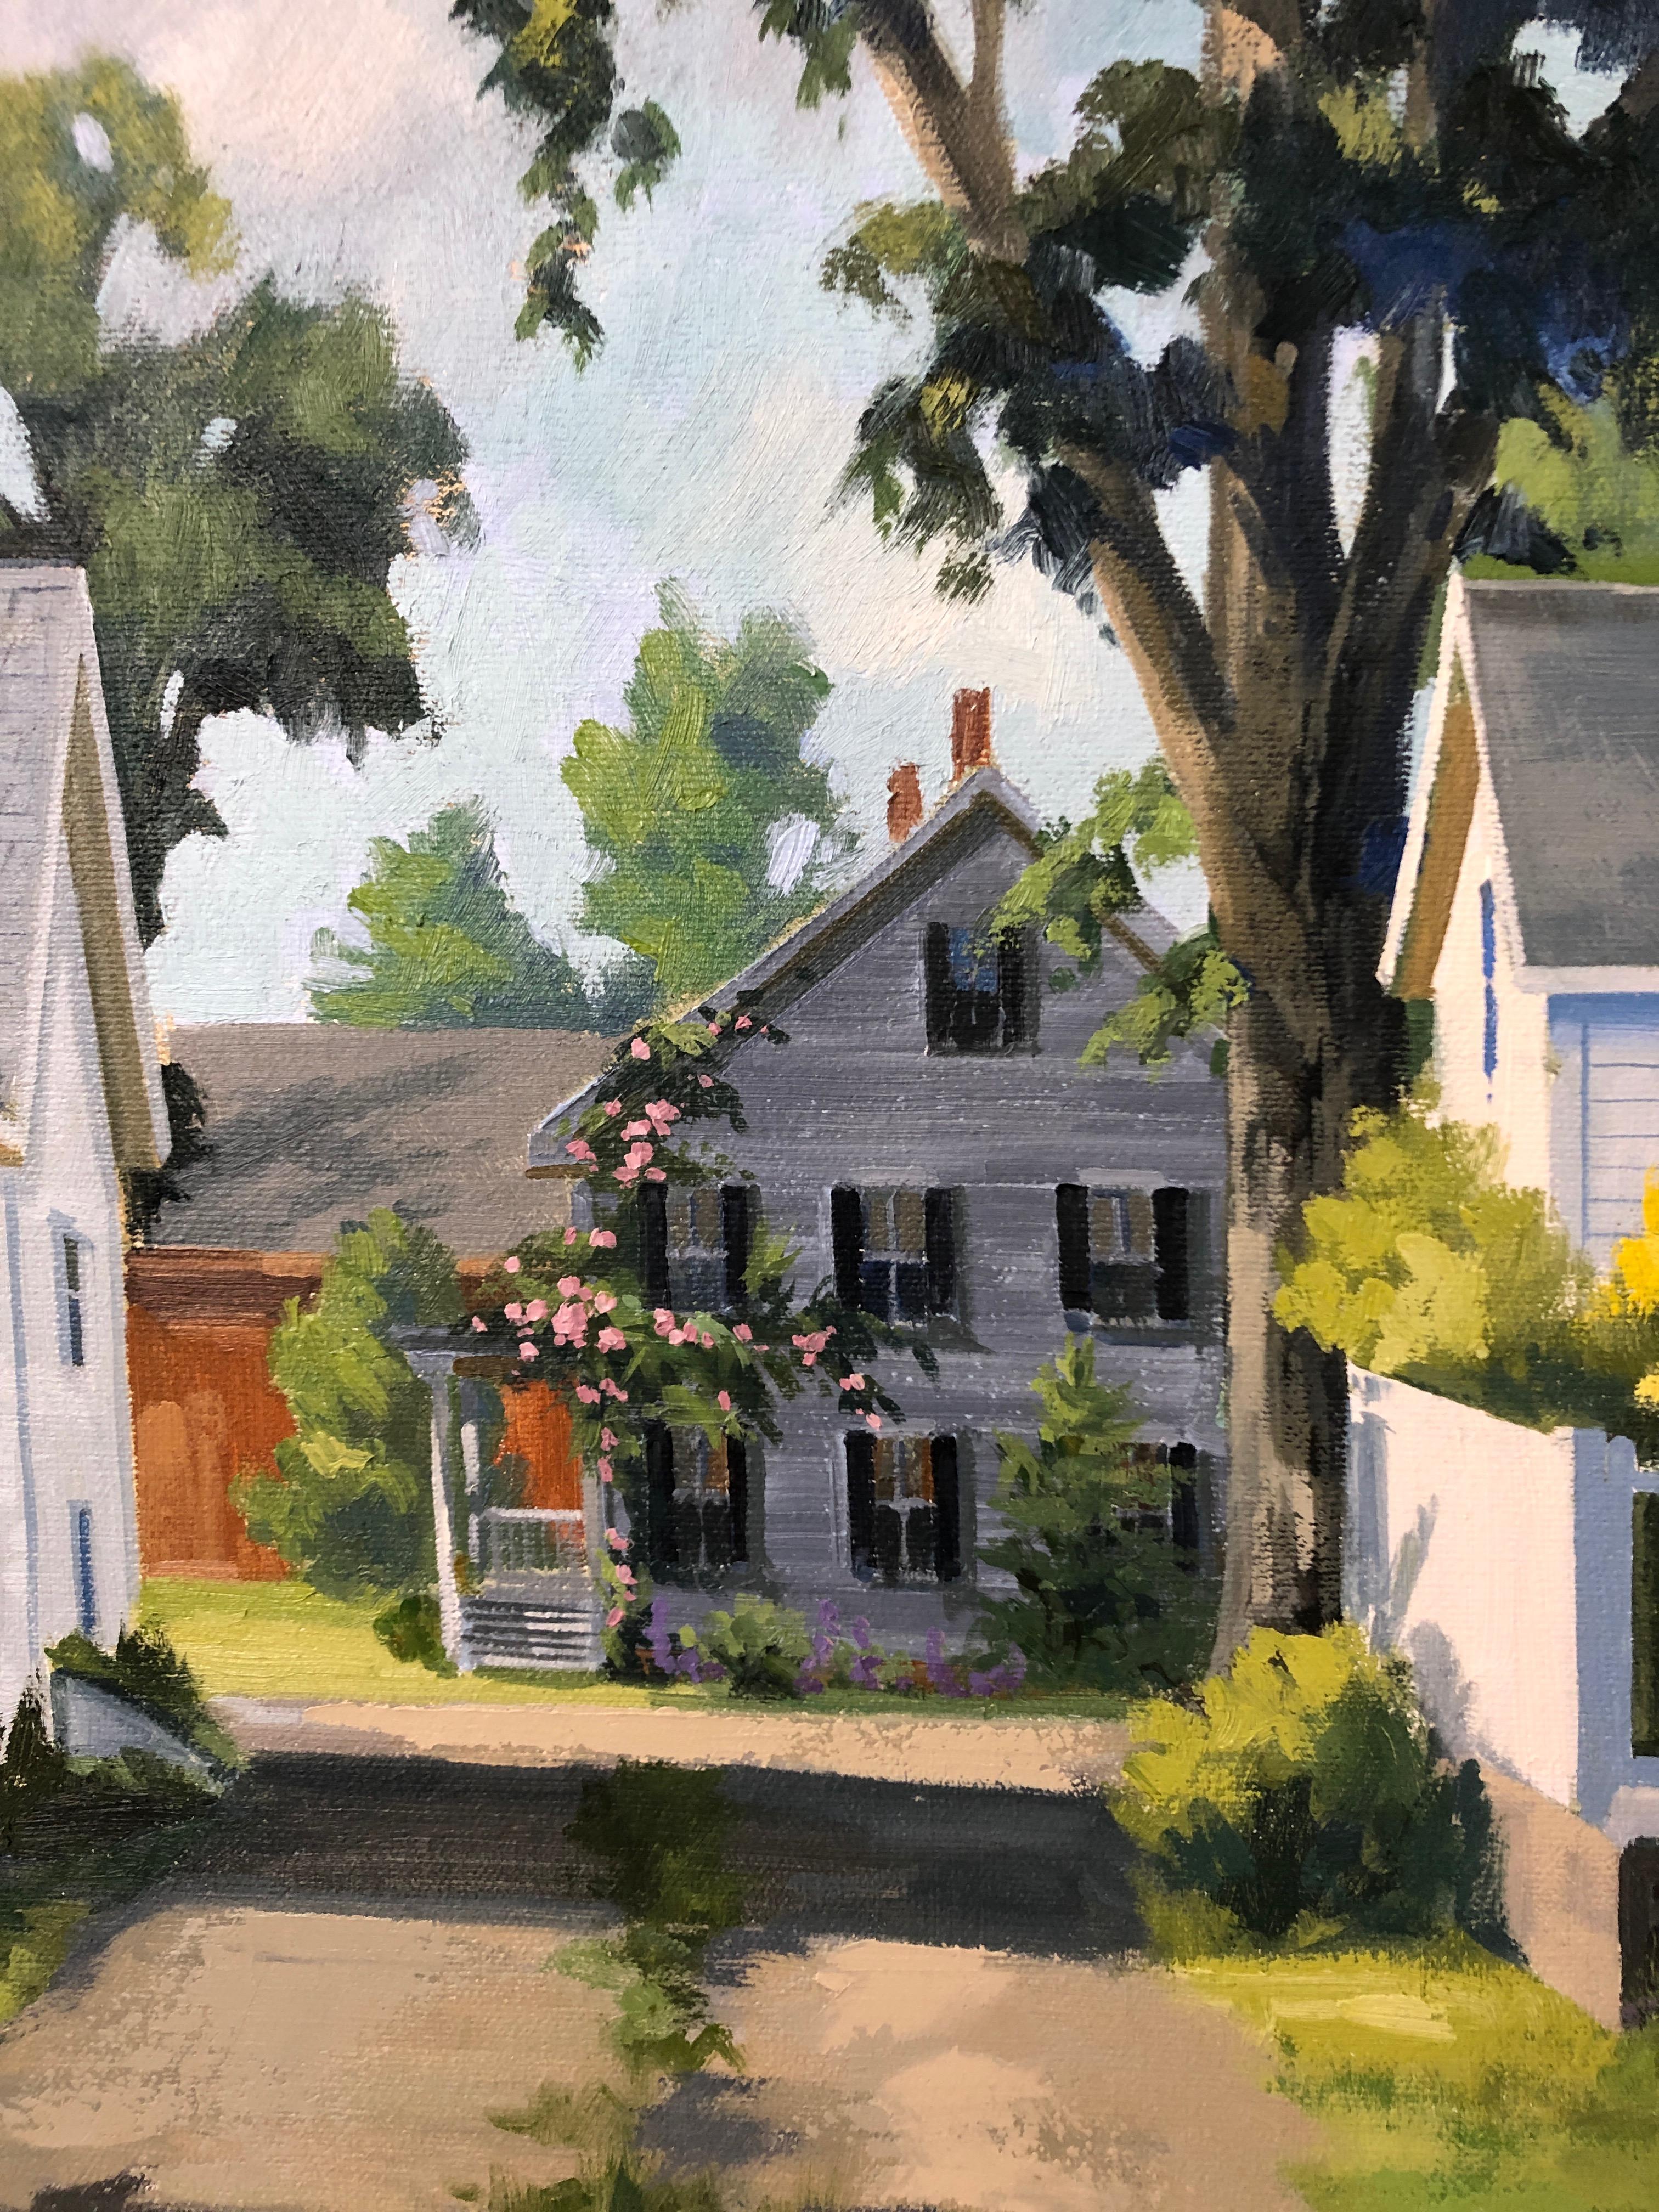 Wonderful sunny afternoon painting by renowned artist Line Tutwiler having a sun dappled lawn and lovely white clapboard house covered with red roses. Looks like a scene in Martha's Vineyard or the like. Beautiful giltwood frame.  Ms. Tutwiler's